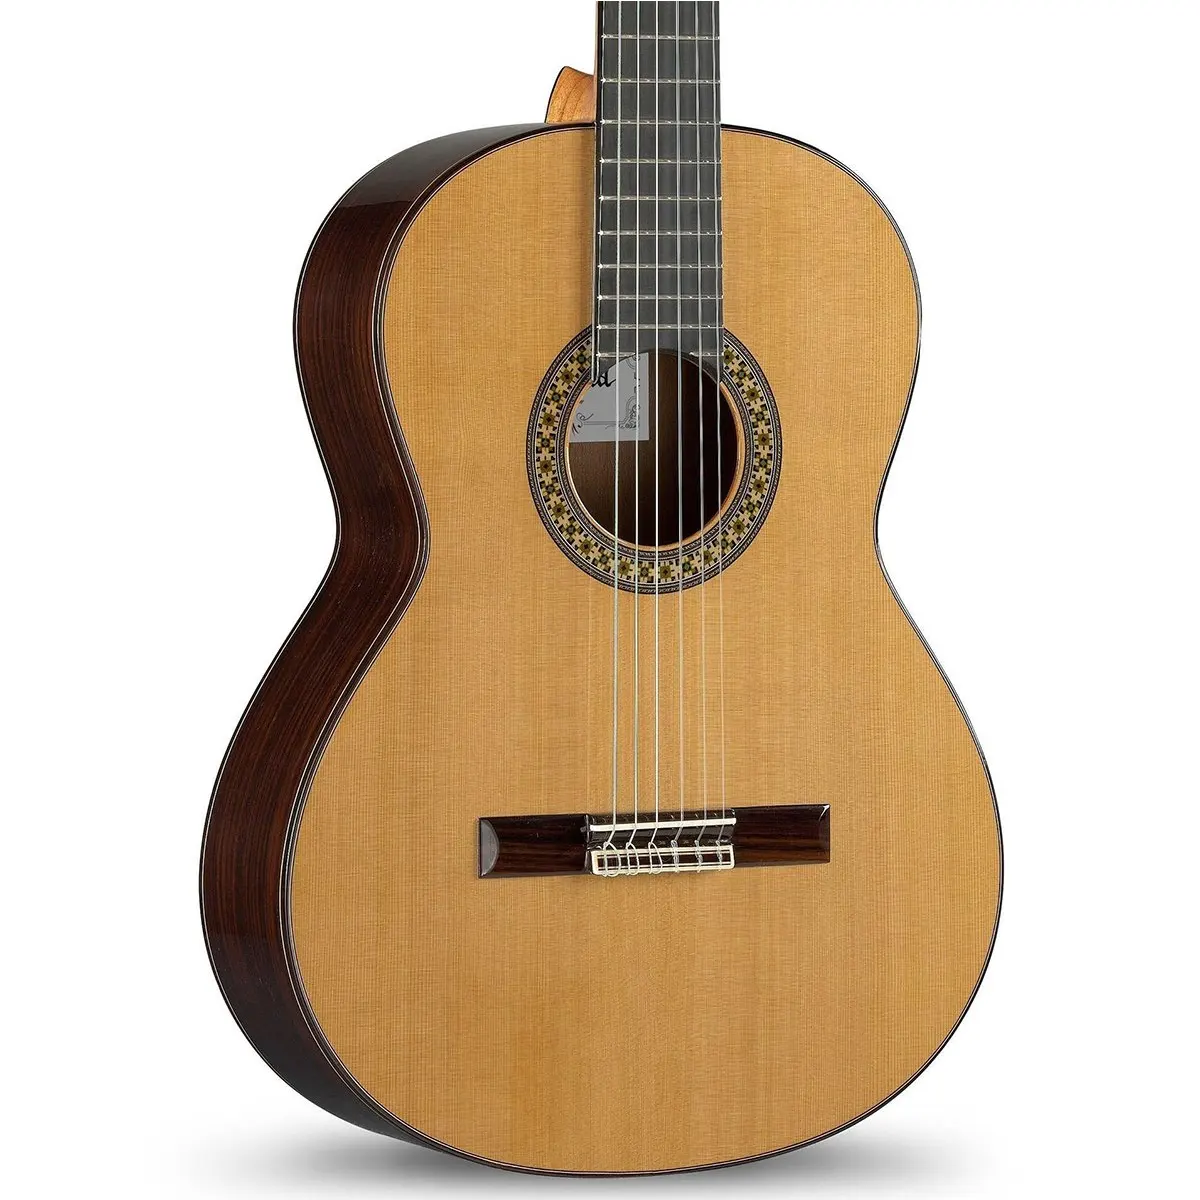 Exploring Elegance and Artistry: Alhambra 4P Review for Discerning Guitarists